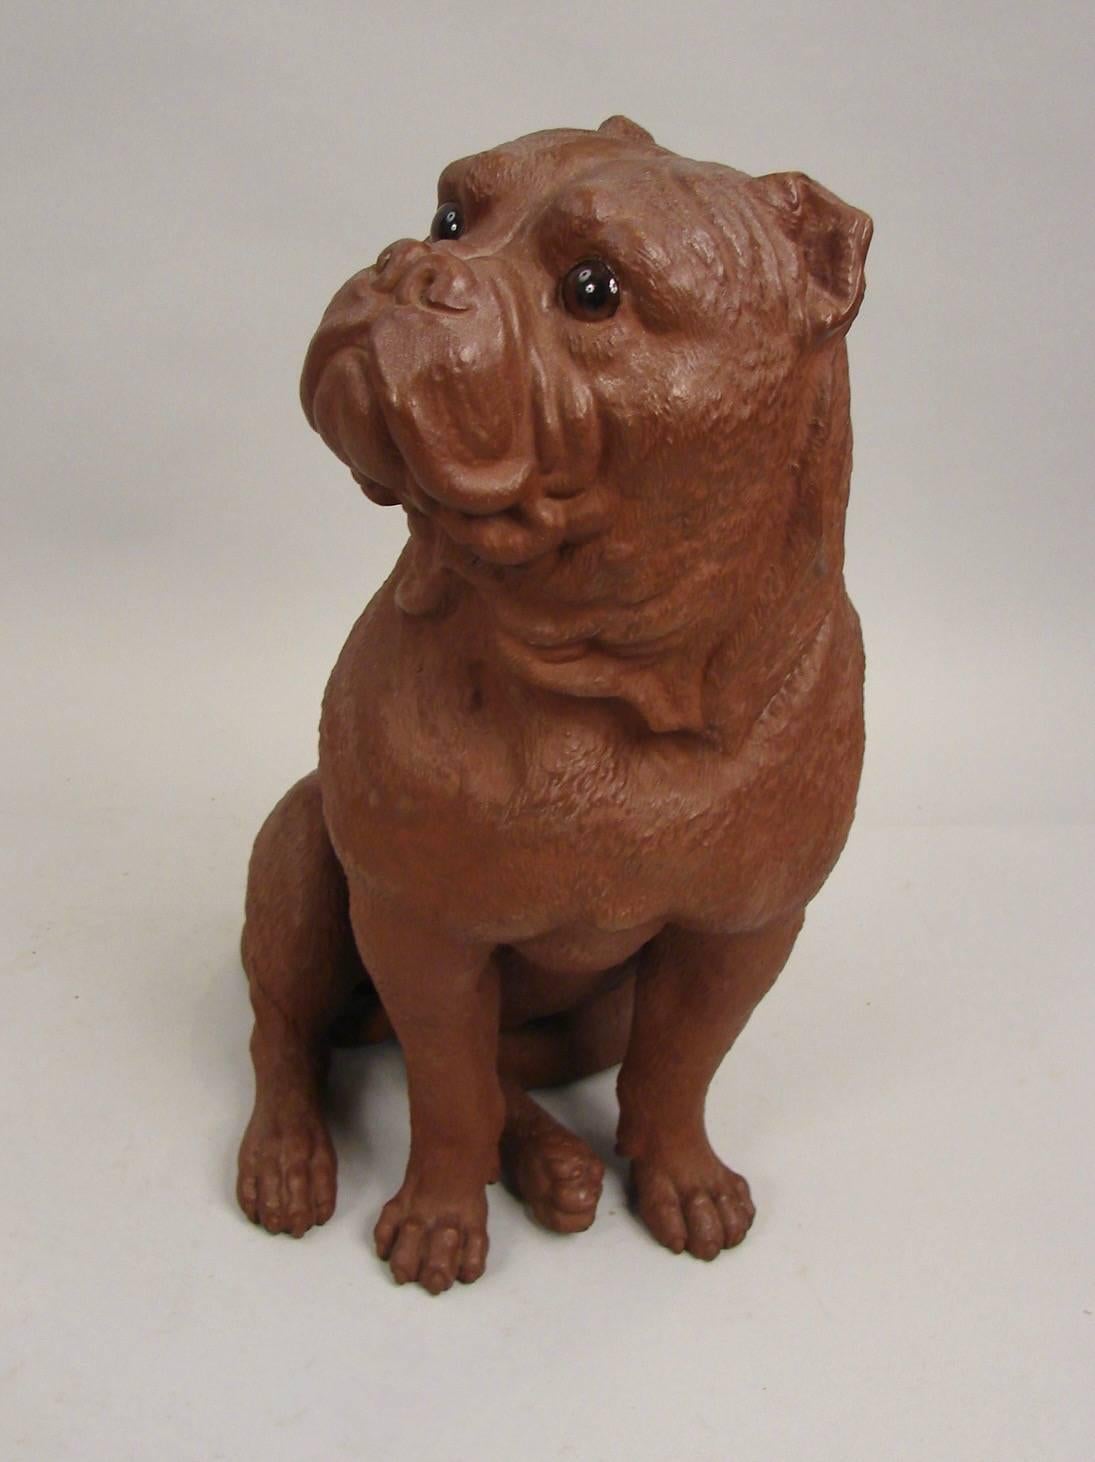 A well-modeled Austrian terracotta sculpture of a seated bulldog with glass eyes in an alert position, the lifelike animal gazing in your direction.